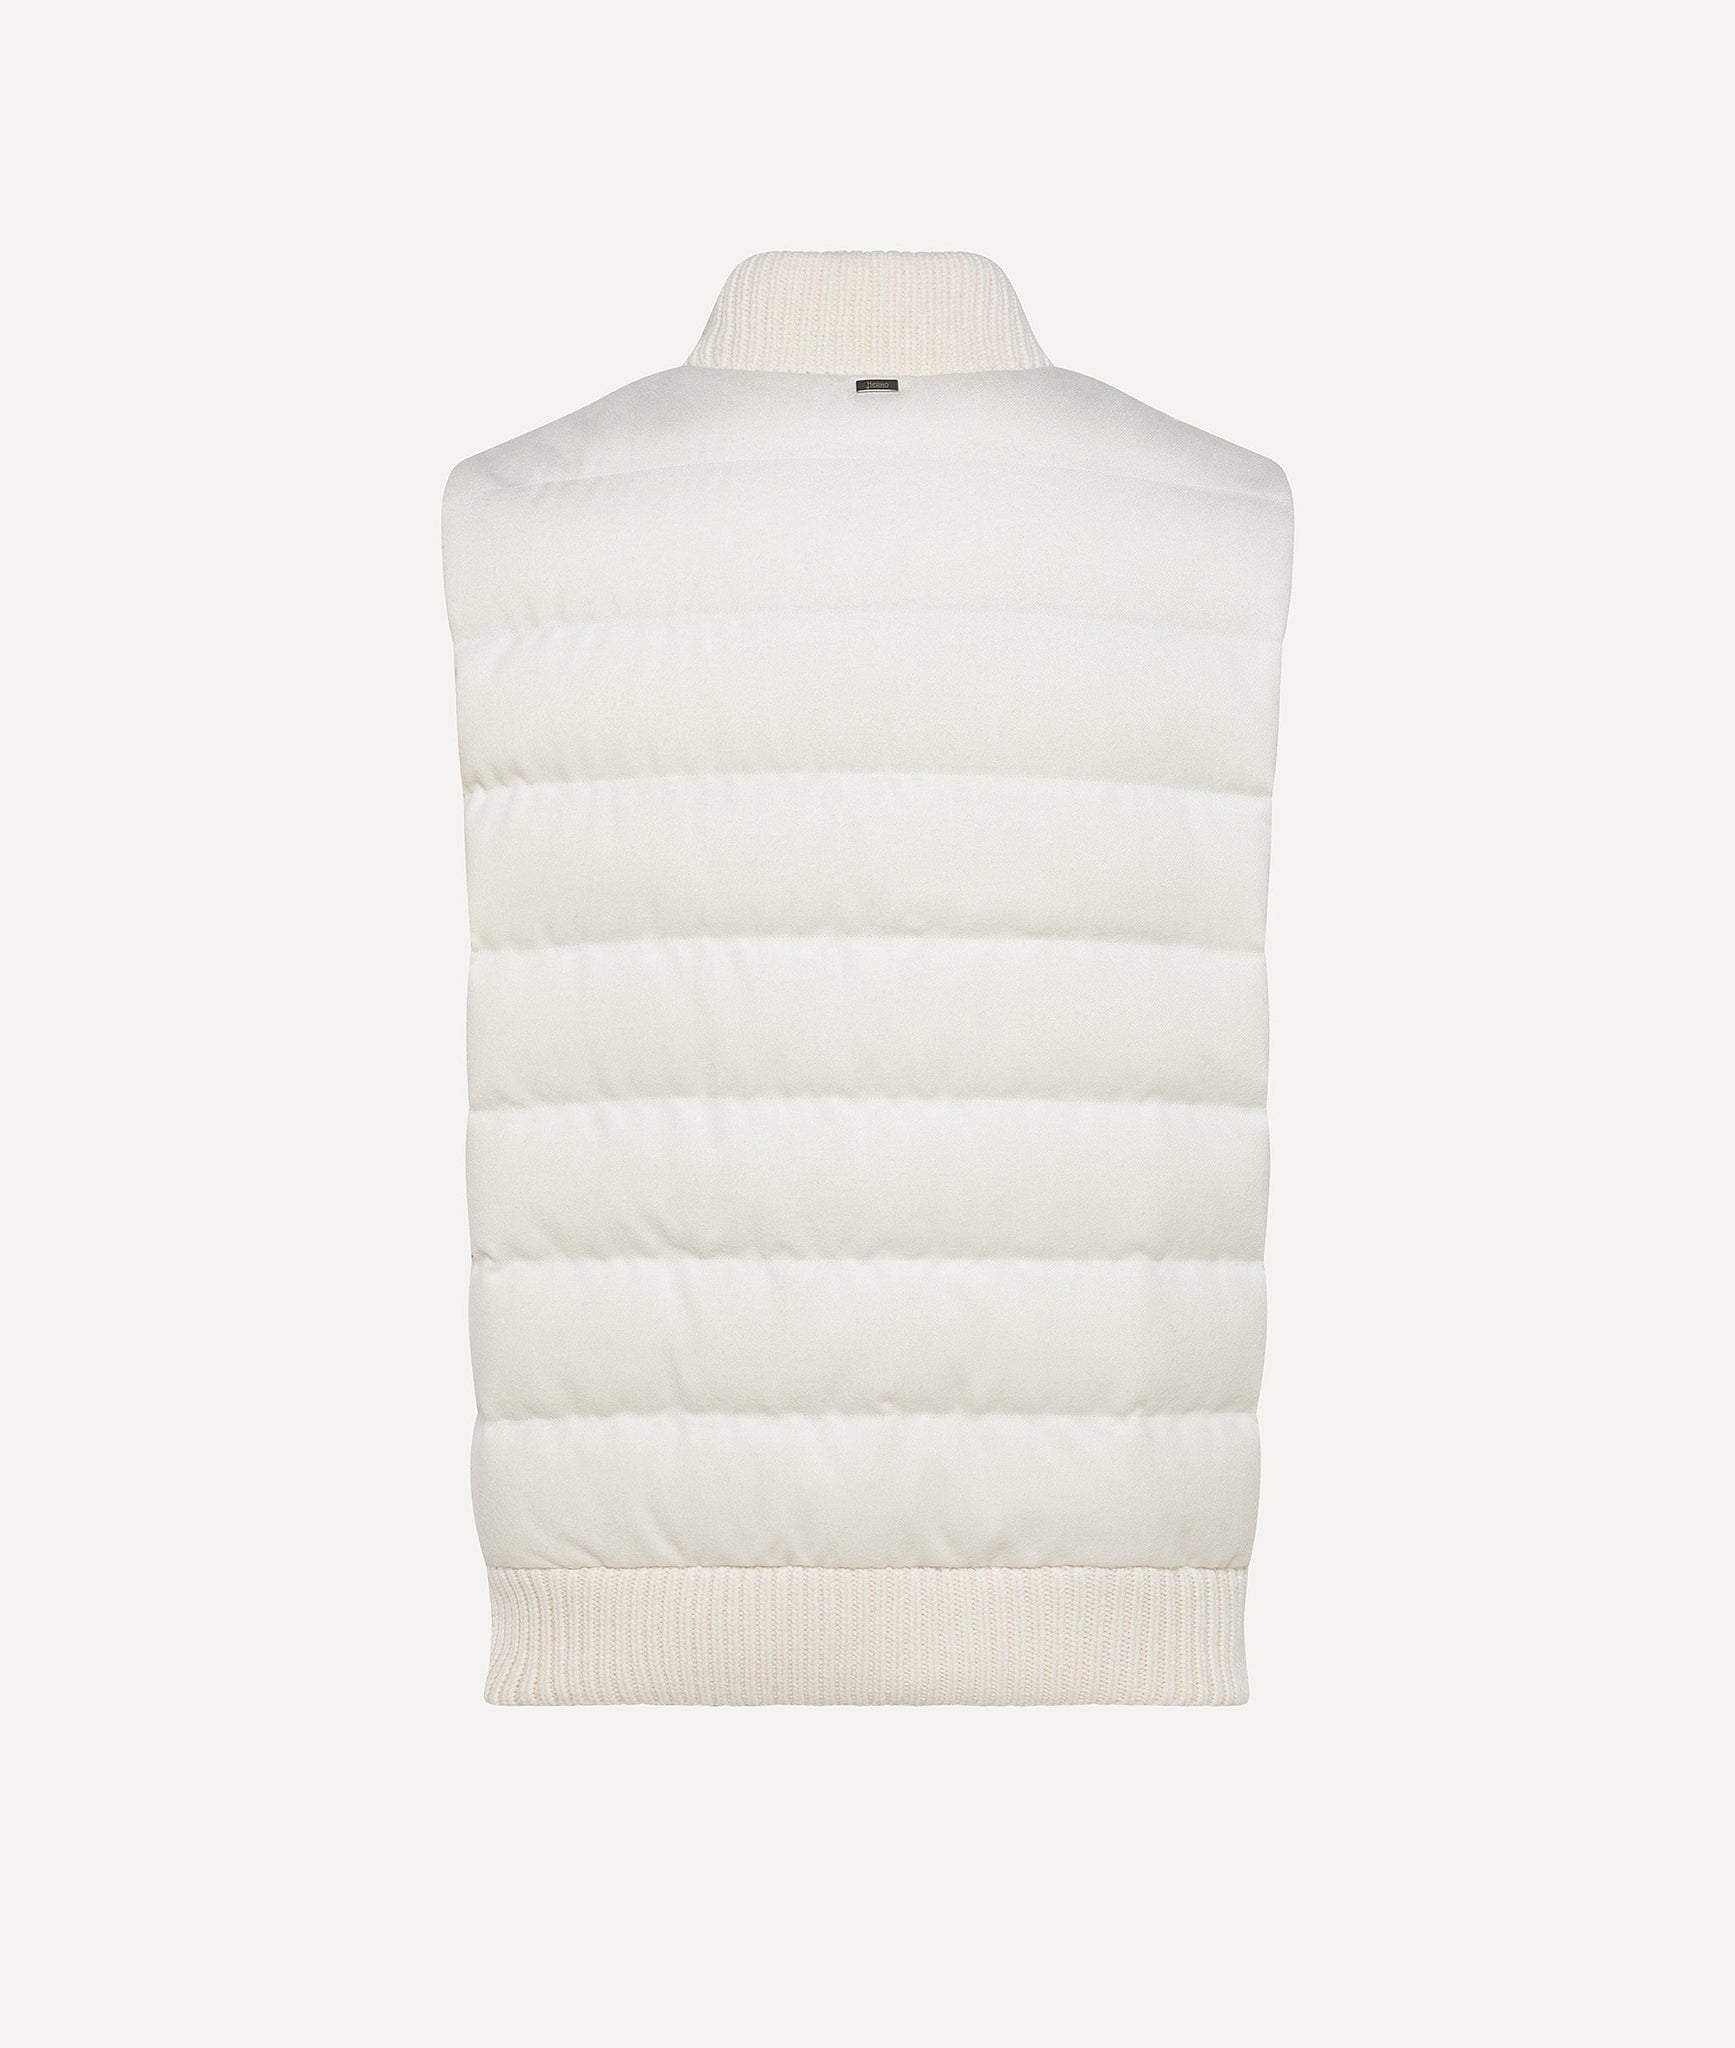 Herno - Gilet in Cashmere